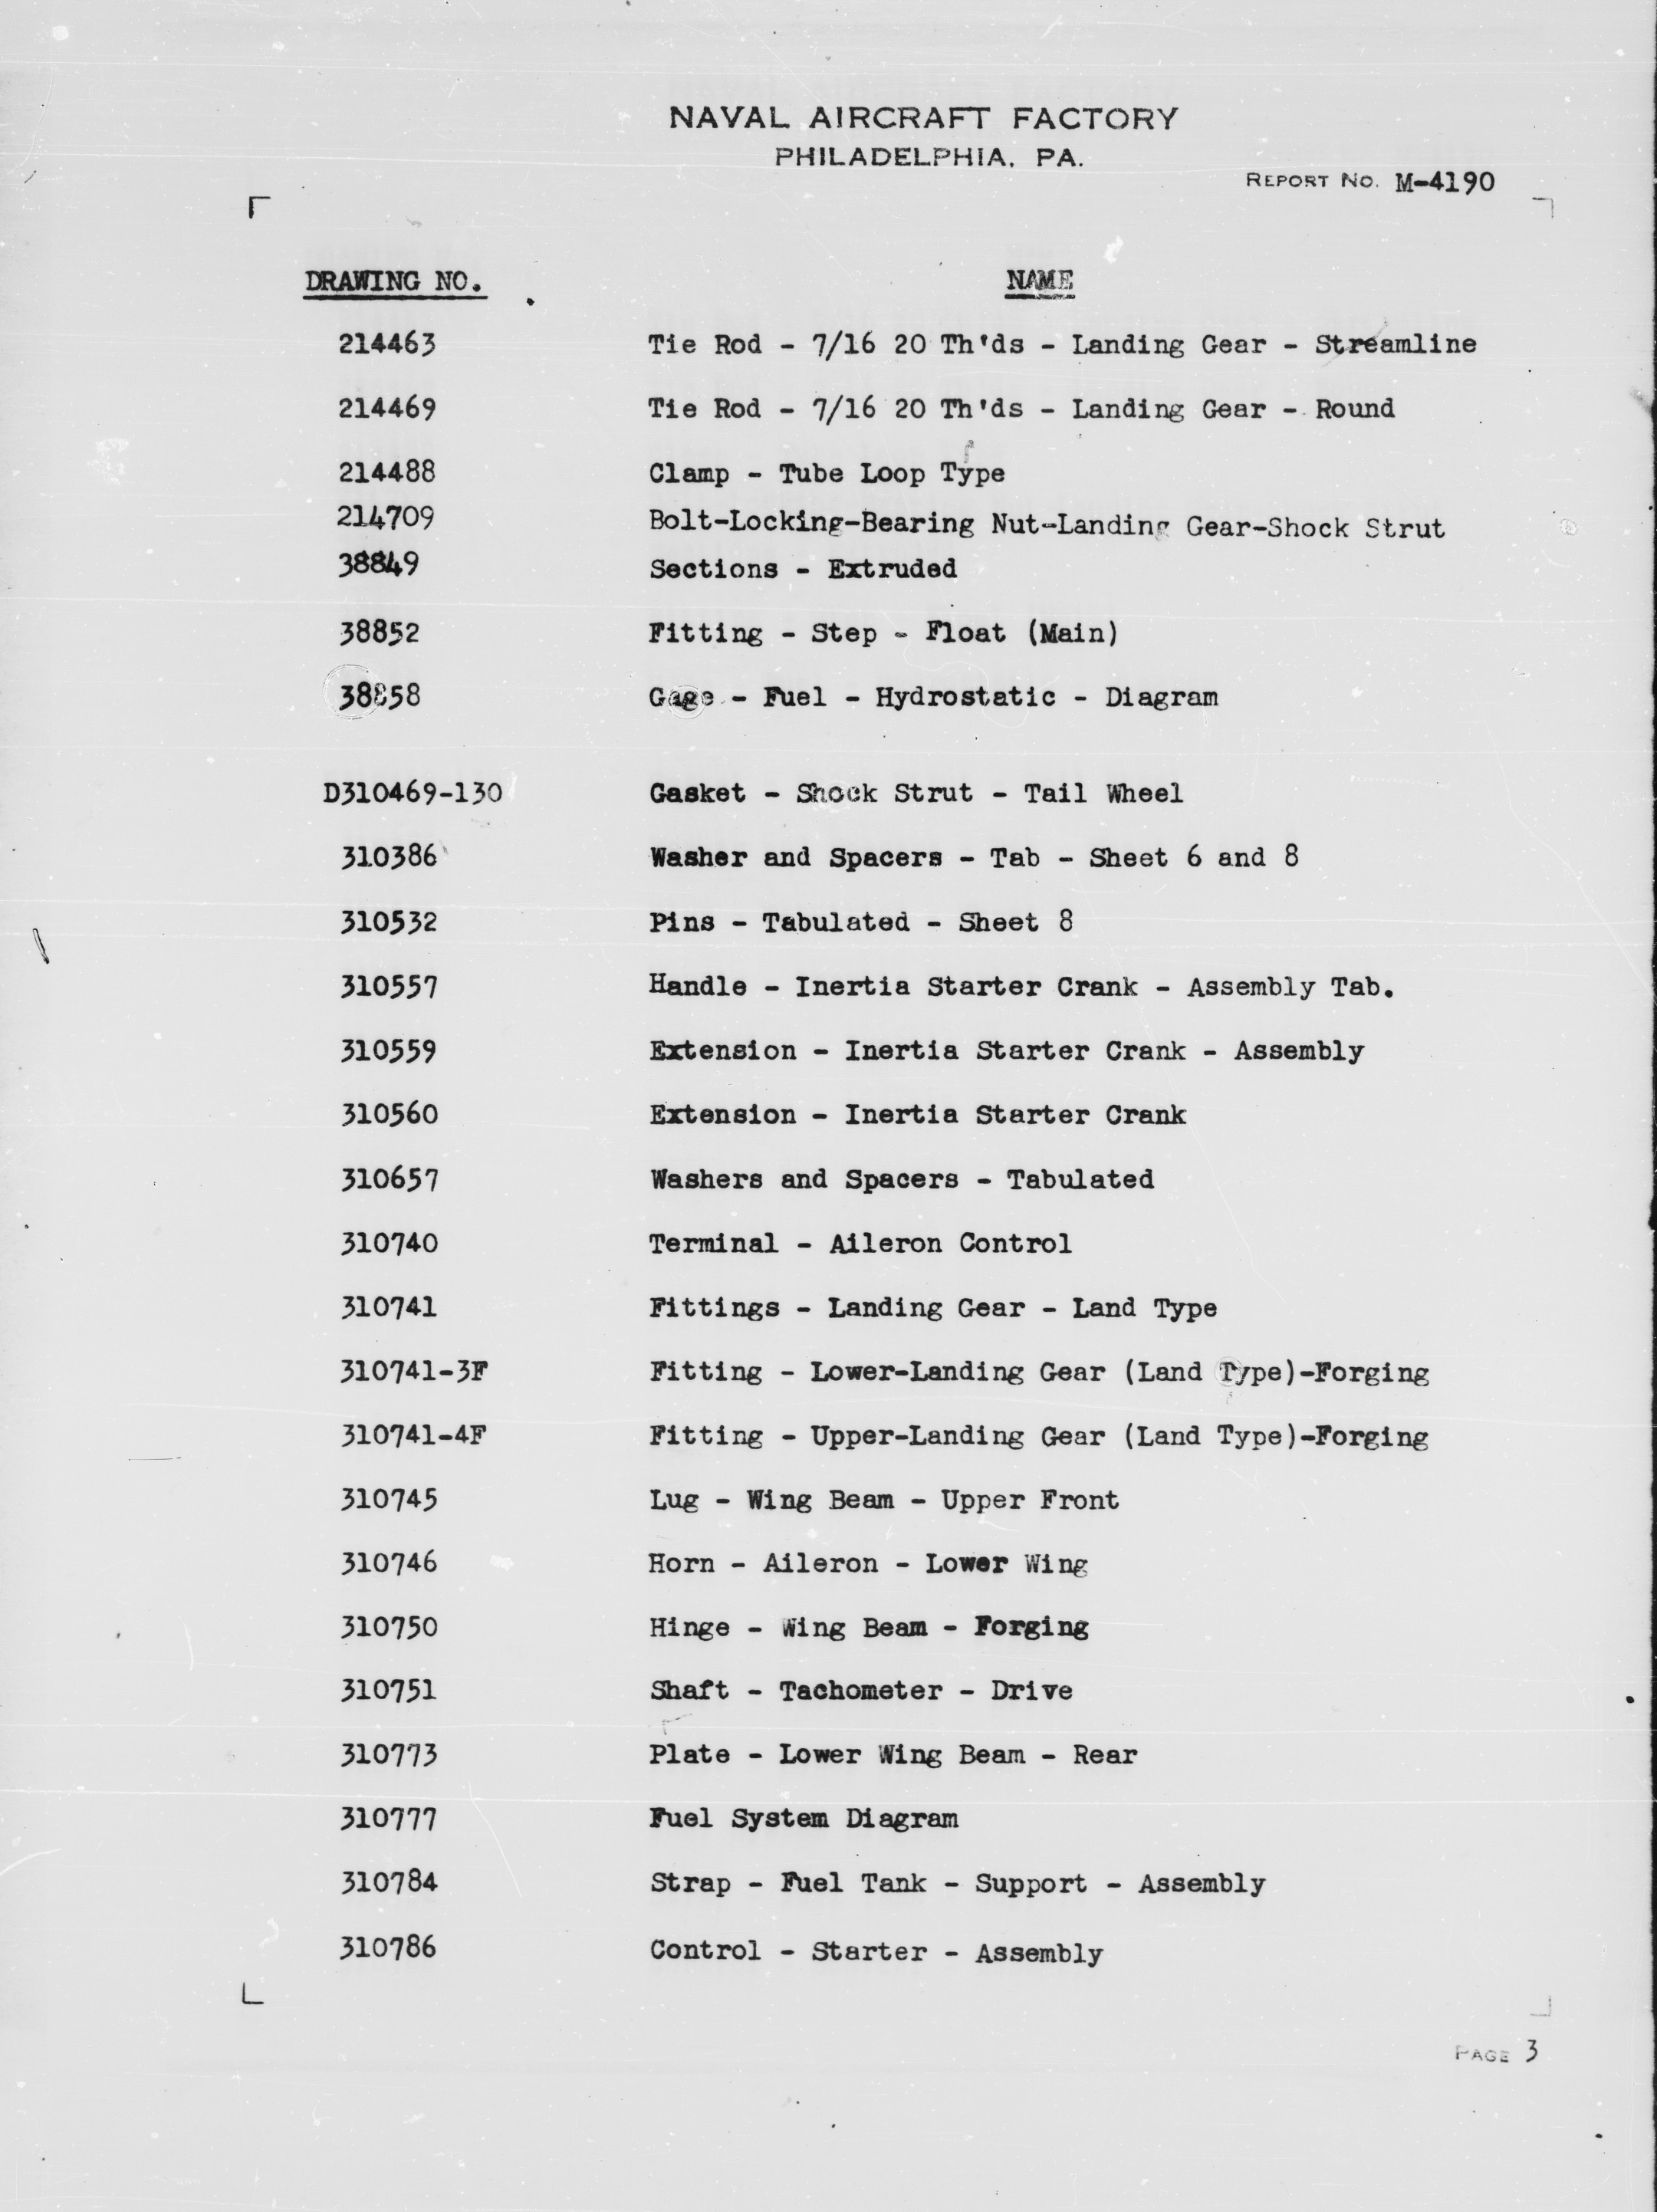 Sample page 4 from AirCorps Library document: Numerical Index of Drawings for Model N3N-3 Airplane